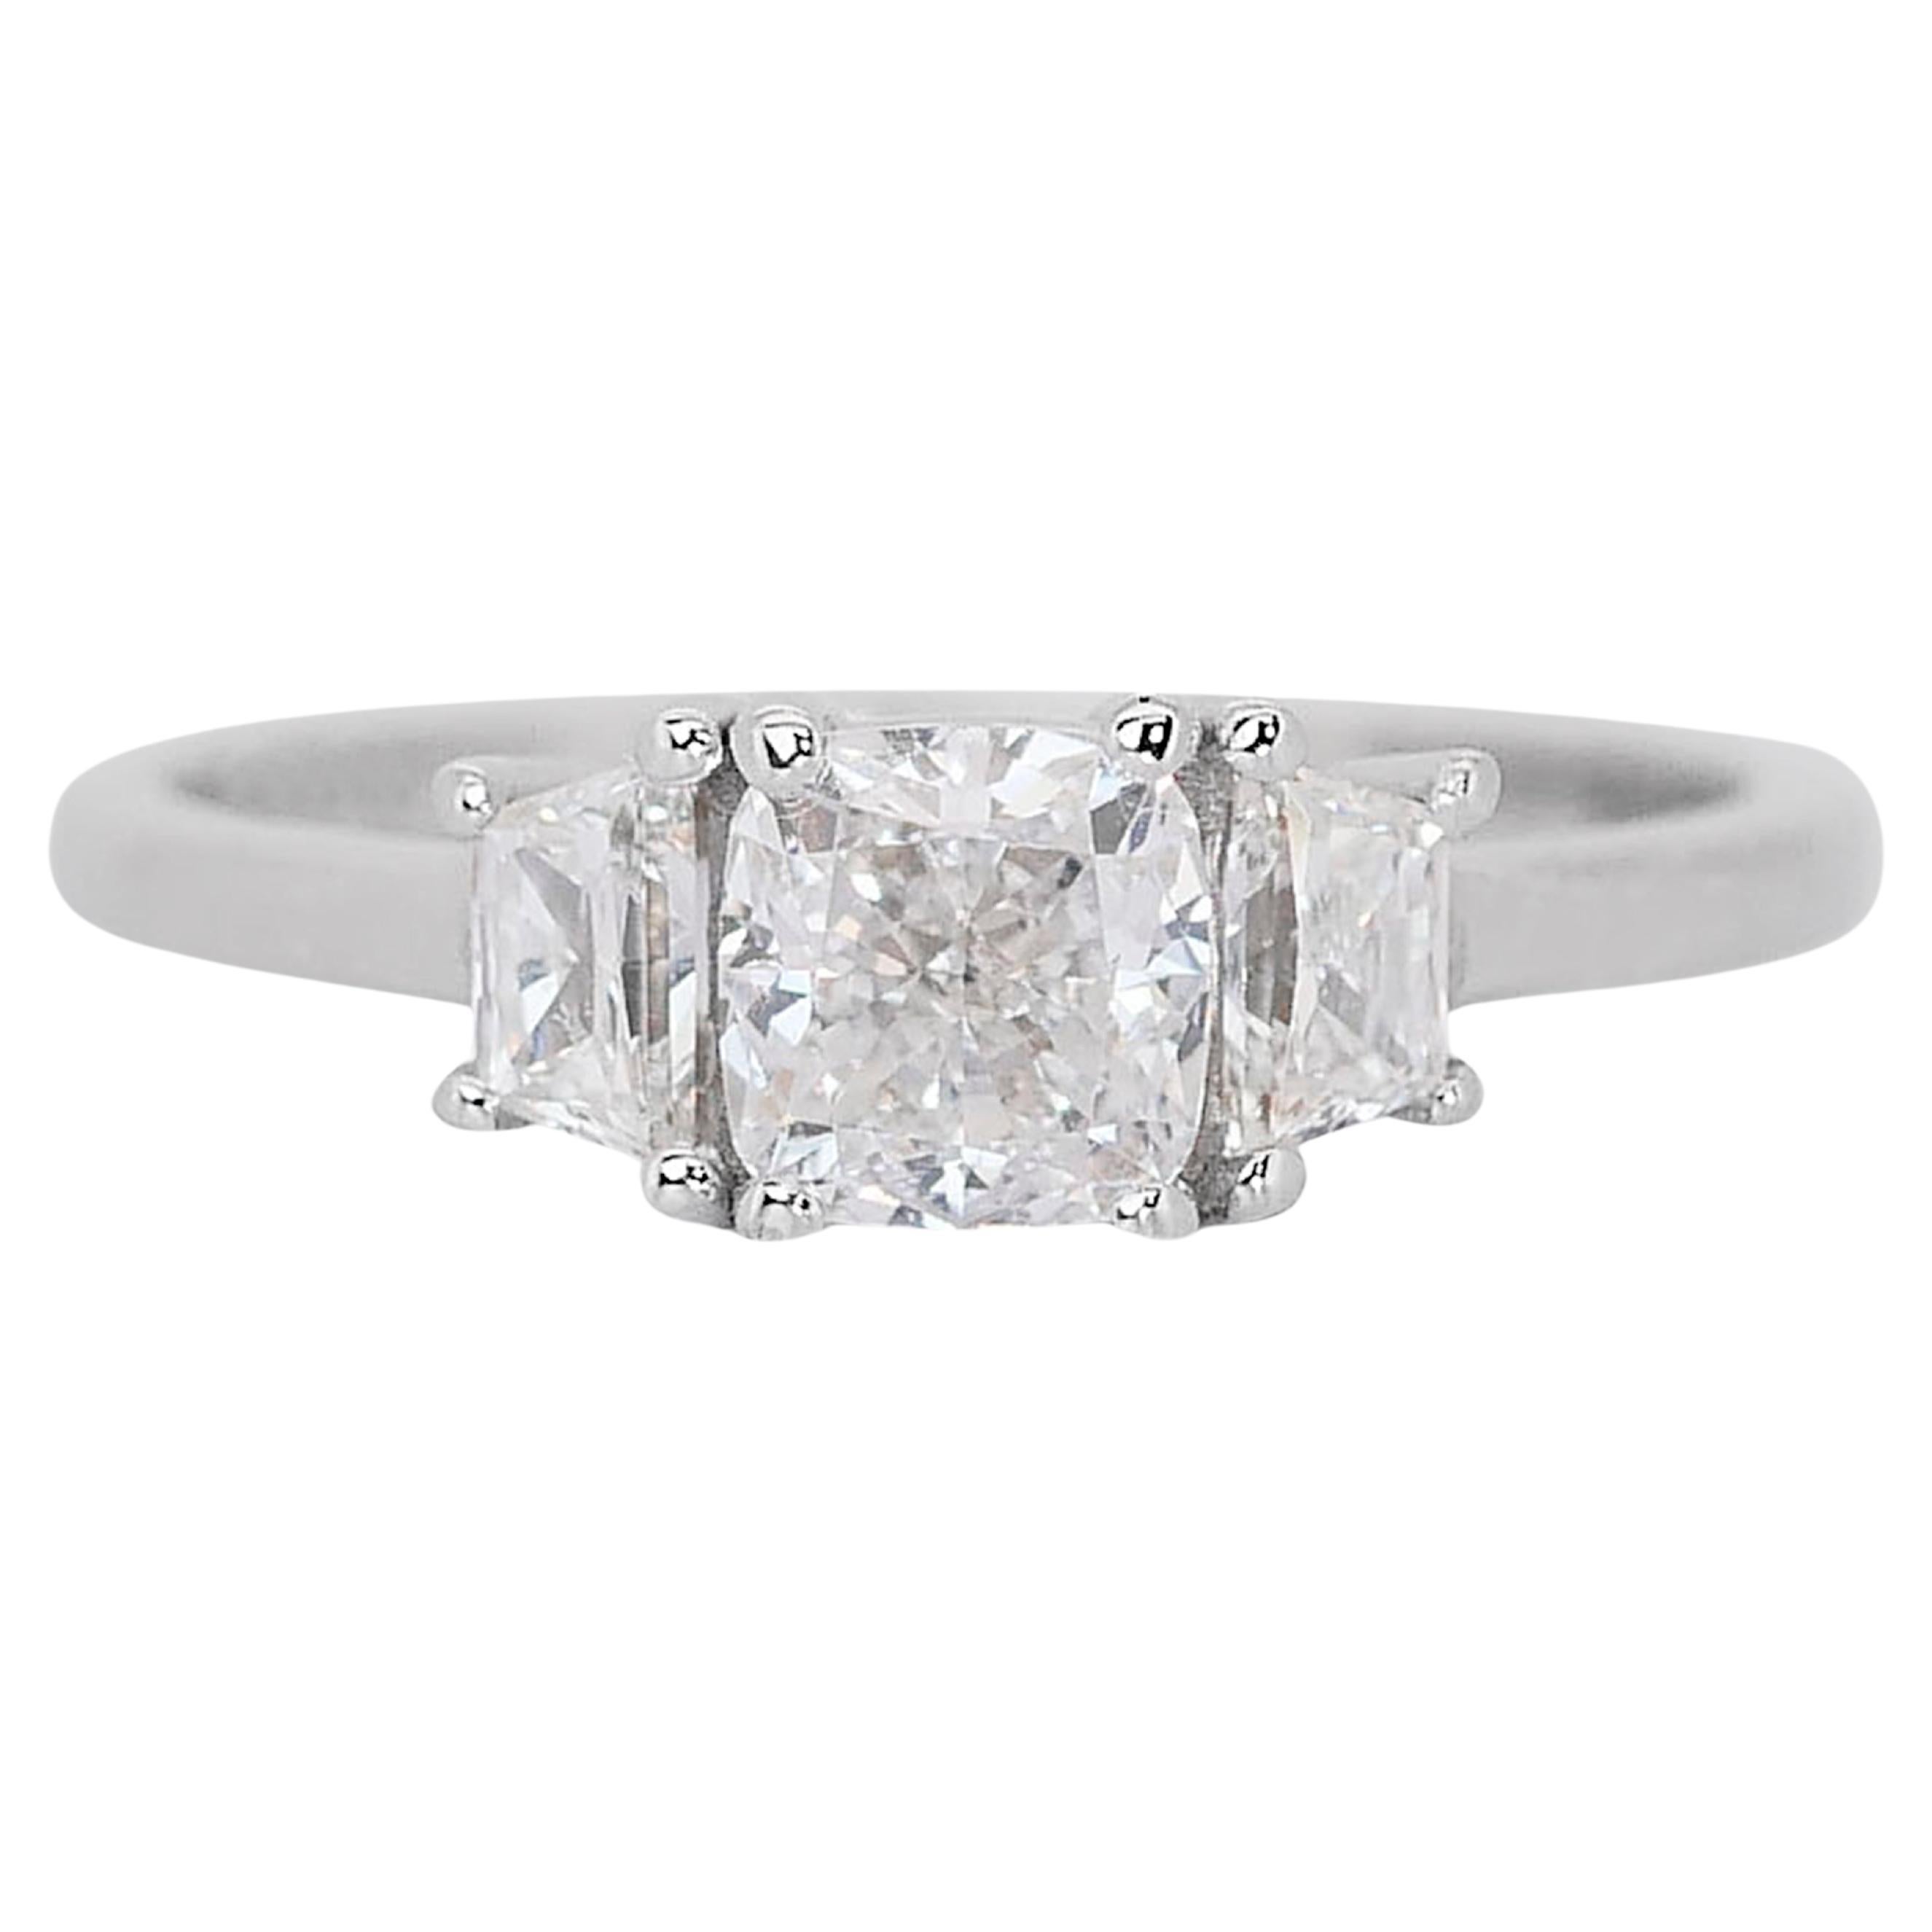 Exquisite 18K White Gold 3-Stone Diamond Ring with 1.24ct- GIA Certified  For Sale